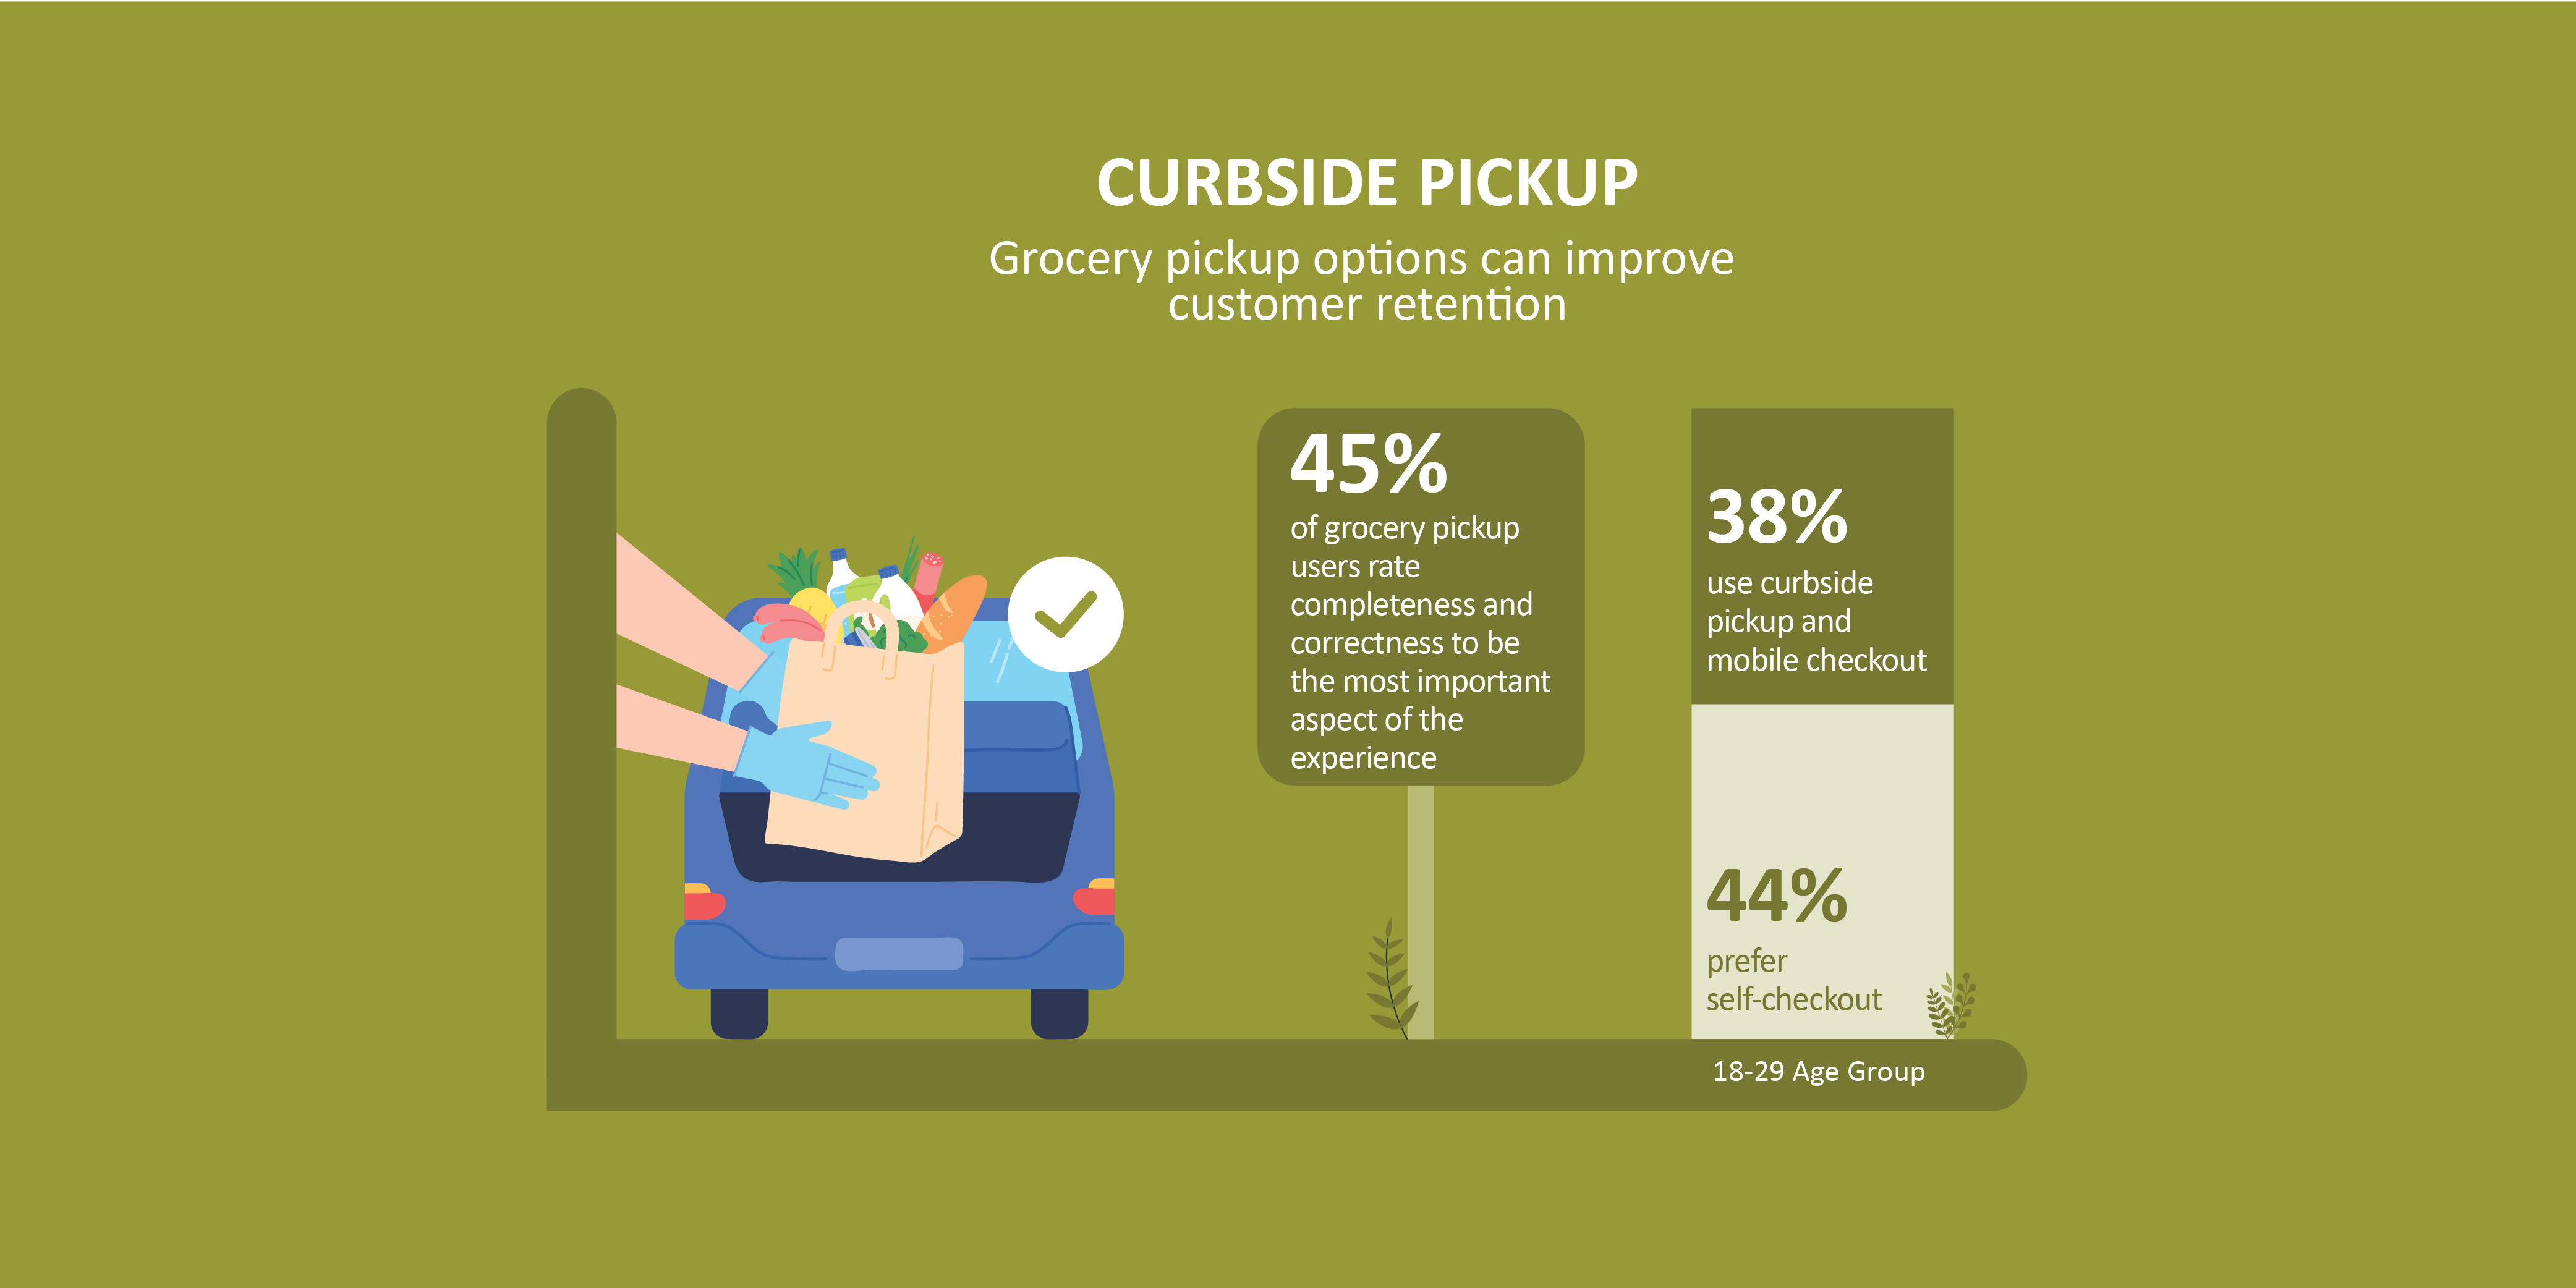 32 percent of shoppers said they use curbside pickup often or always